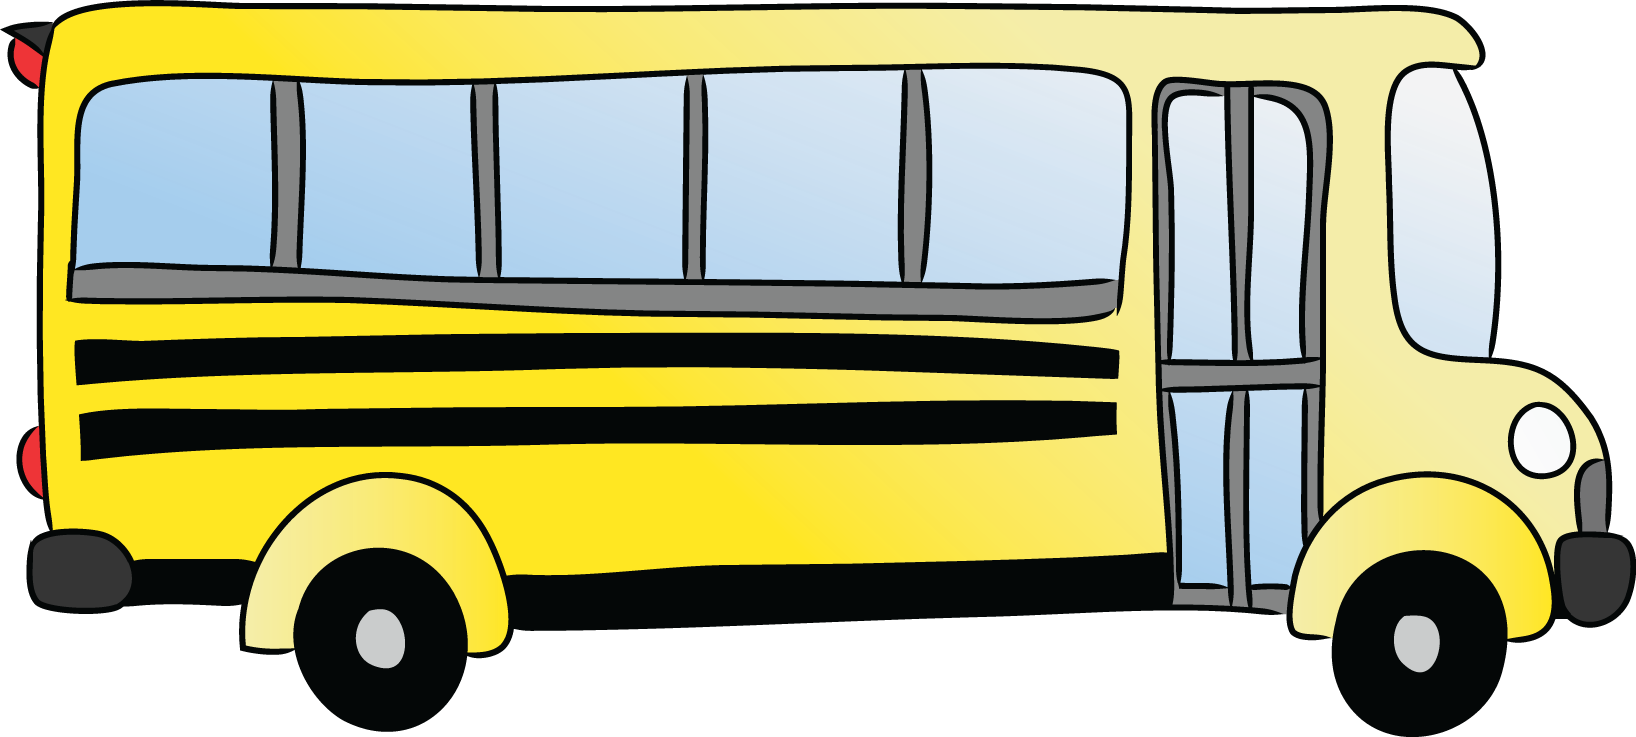 Free Cartoon Picture Of A Bus, Download Free Clip Art, Free.